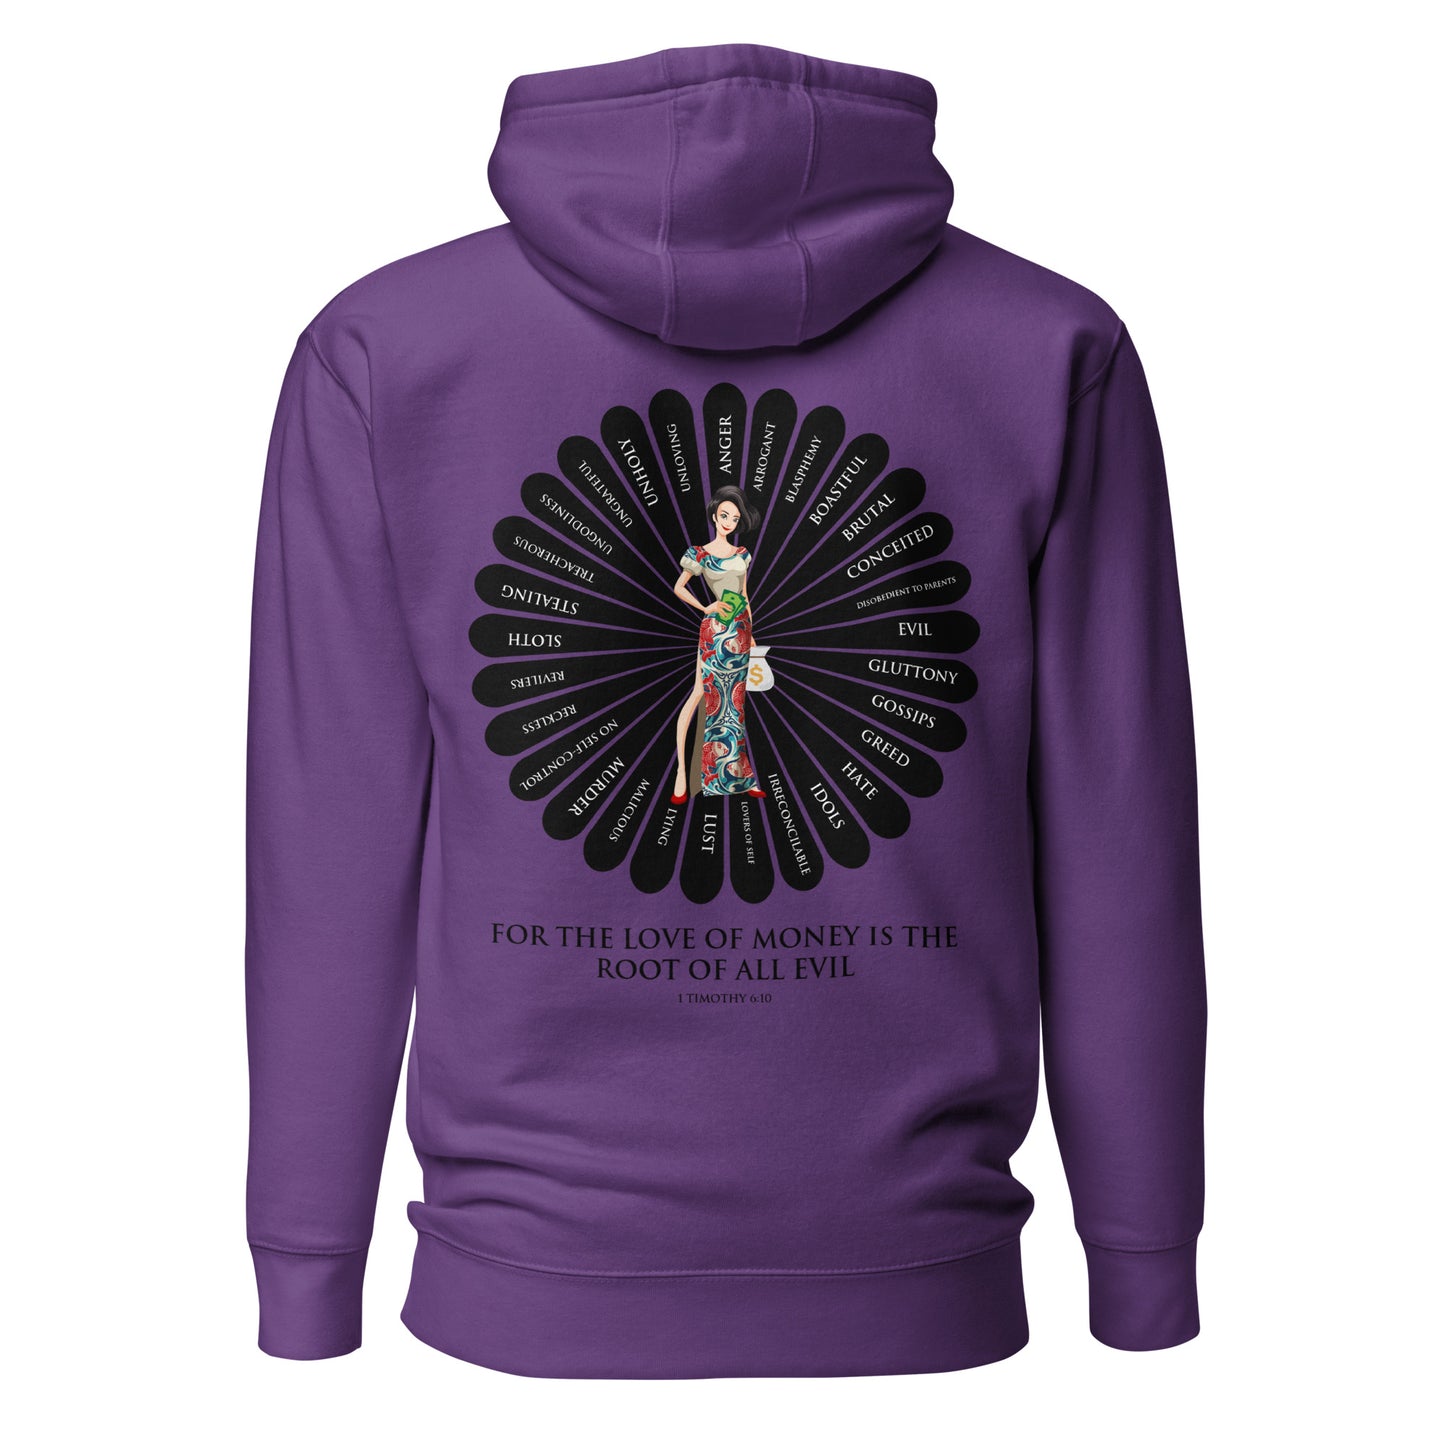 For the Love of Money Women's Hoodie